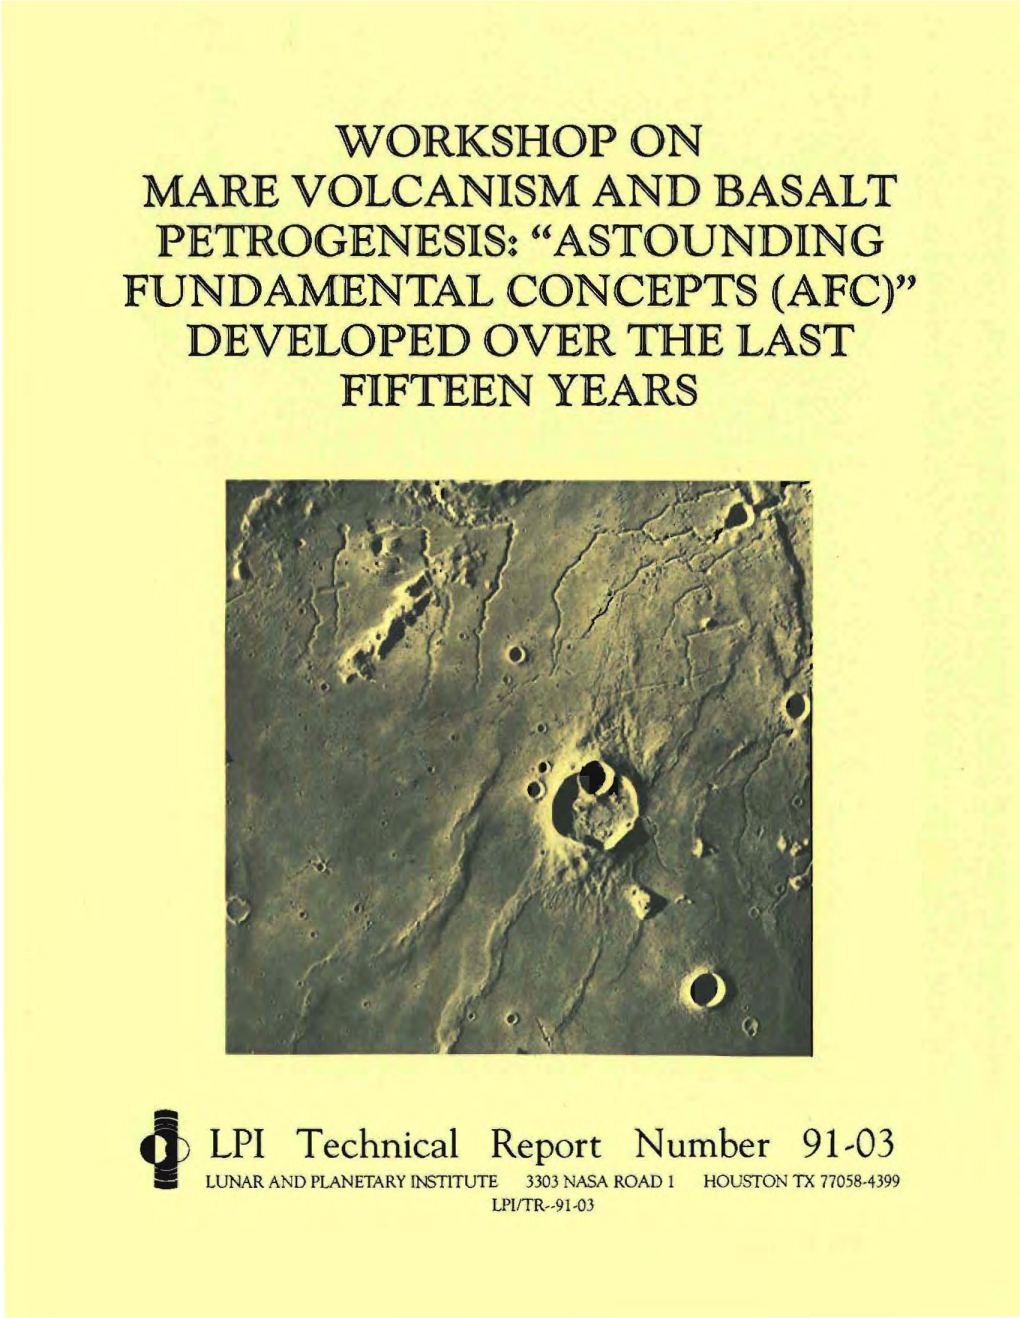 Workshop on Mare Volcanism and Basalt Petrogenesis: "Astounding Fundamental Concepts (Afc)" Developed Over the Last Fifteen Years